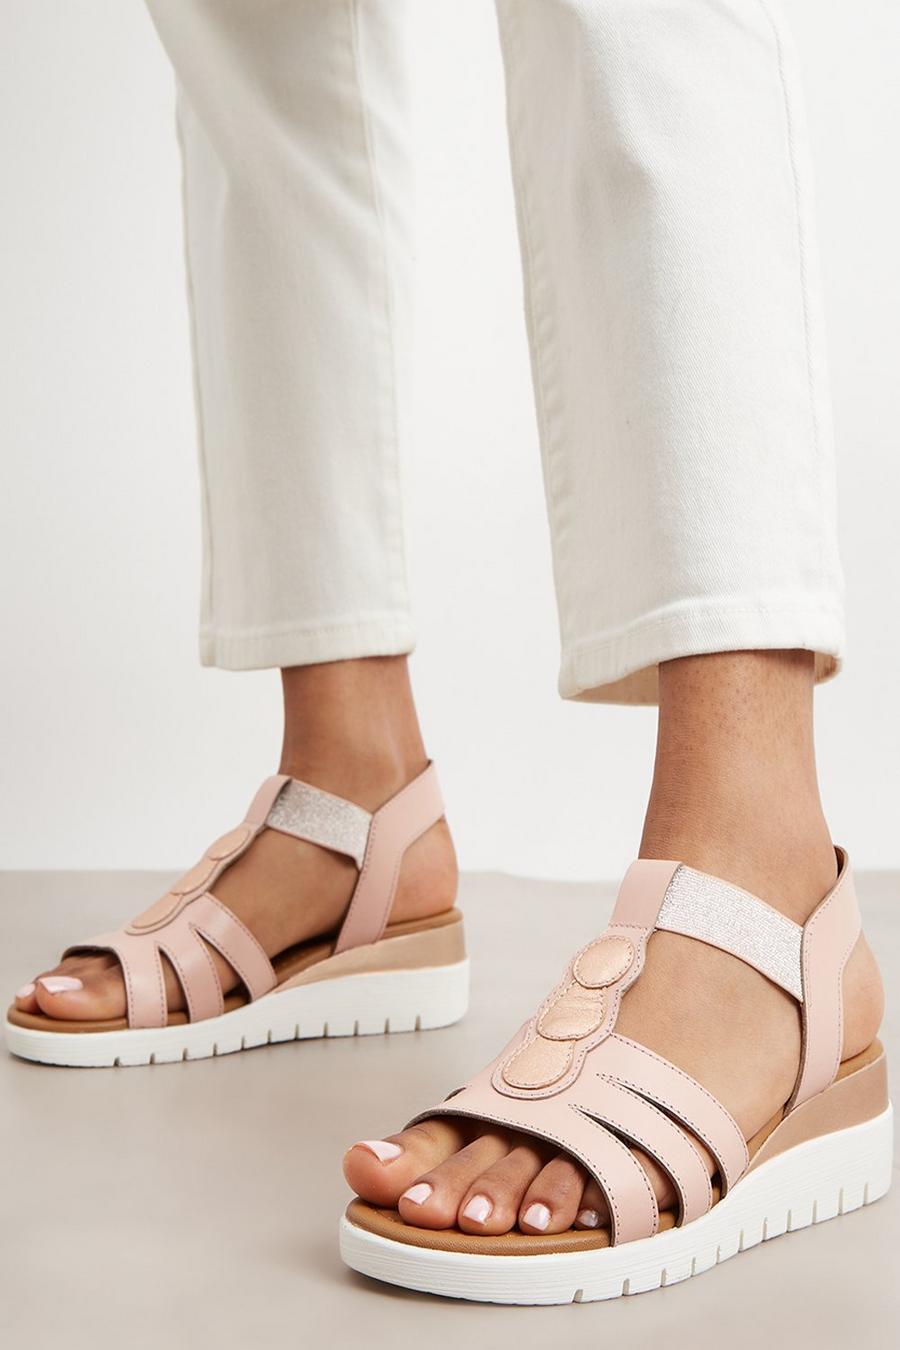 Good For The Sole: Hattie Leather Wide Fit Wedge Sandal